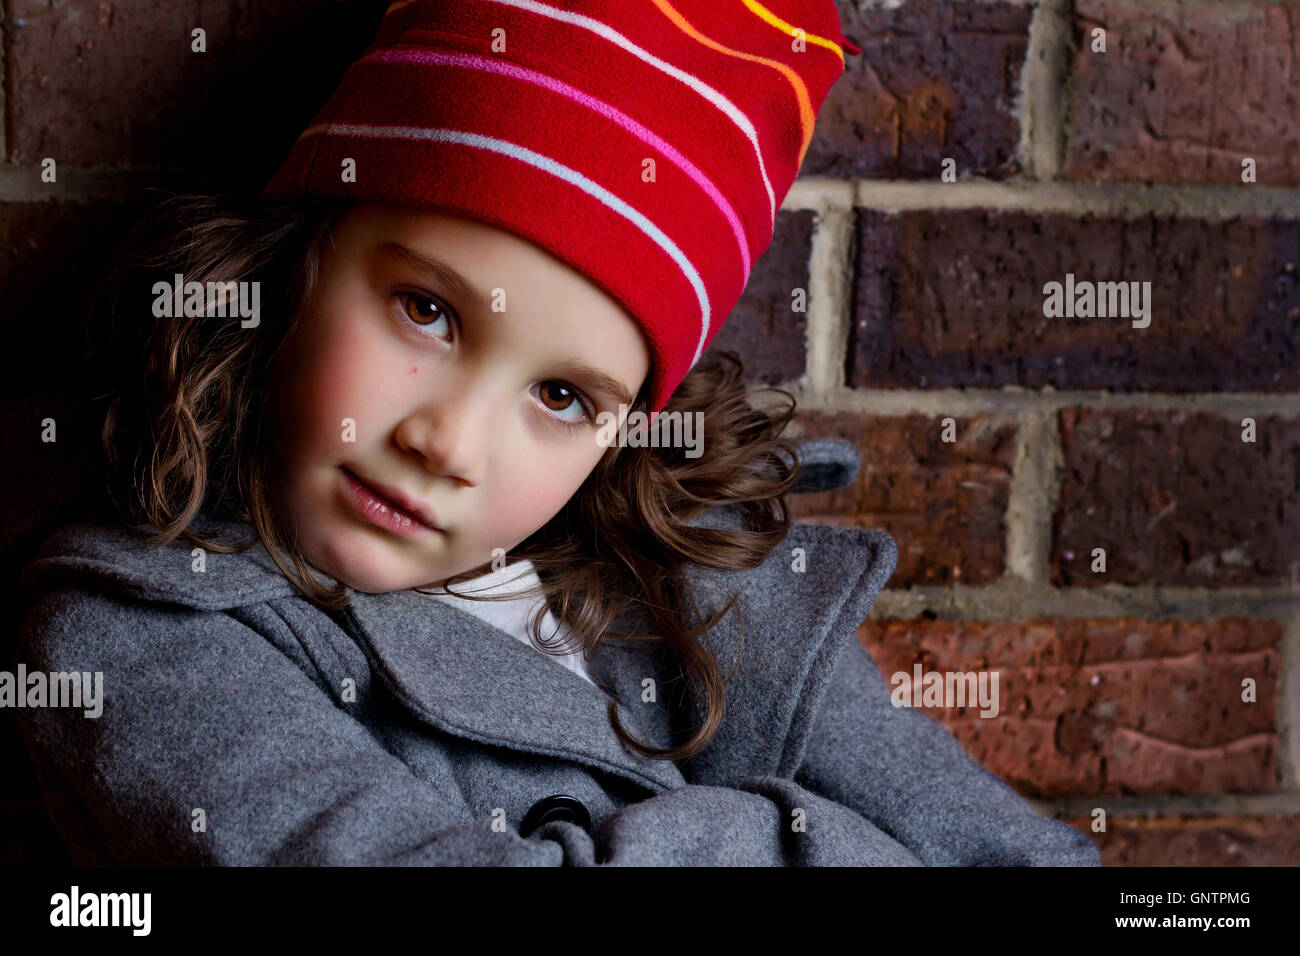 Portrait of a beautiful young child with attitude leaning against a brick wall Stock Photo